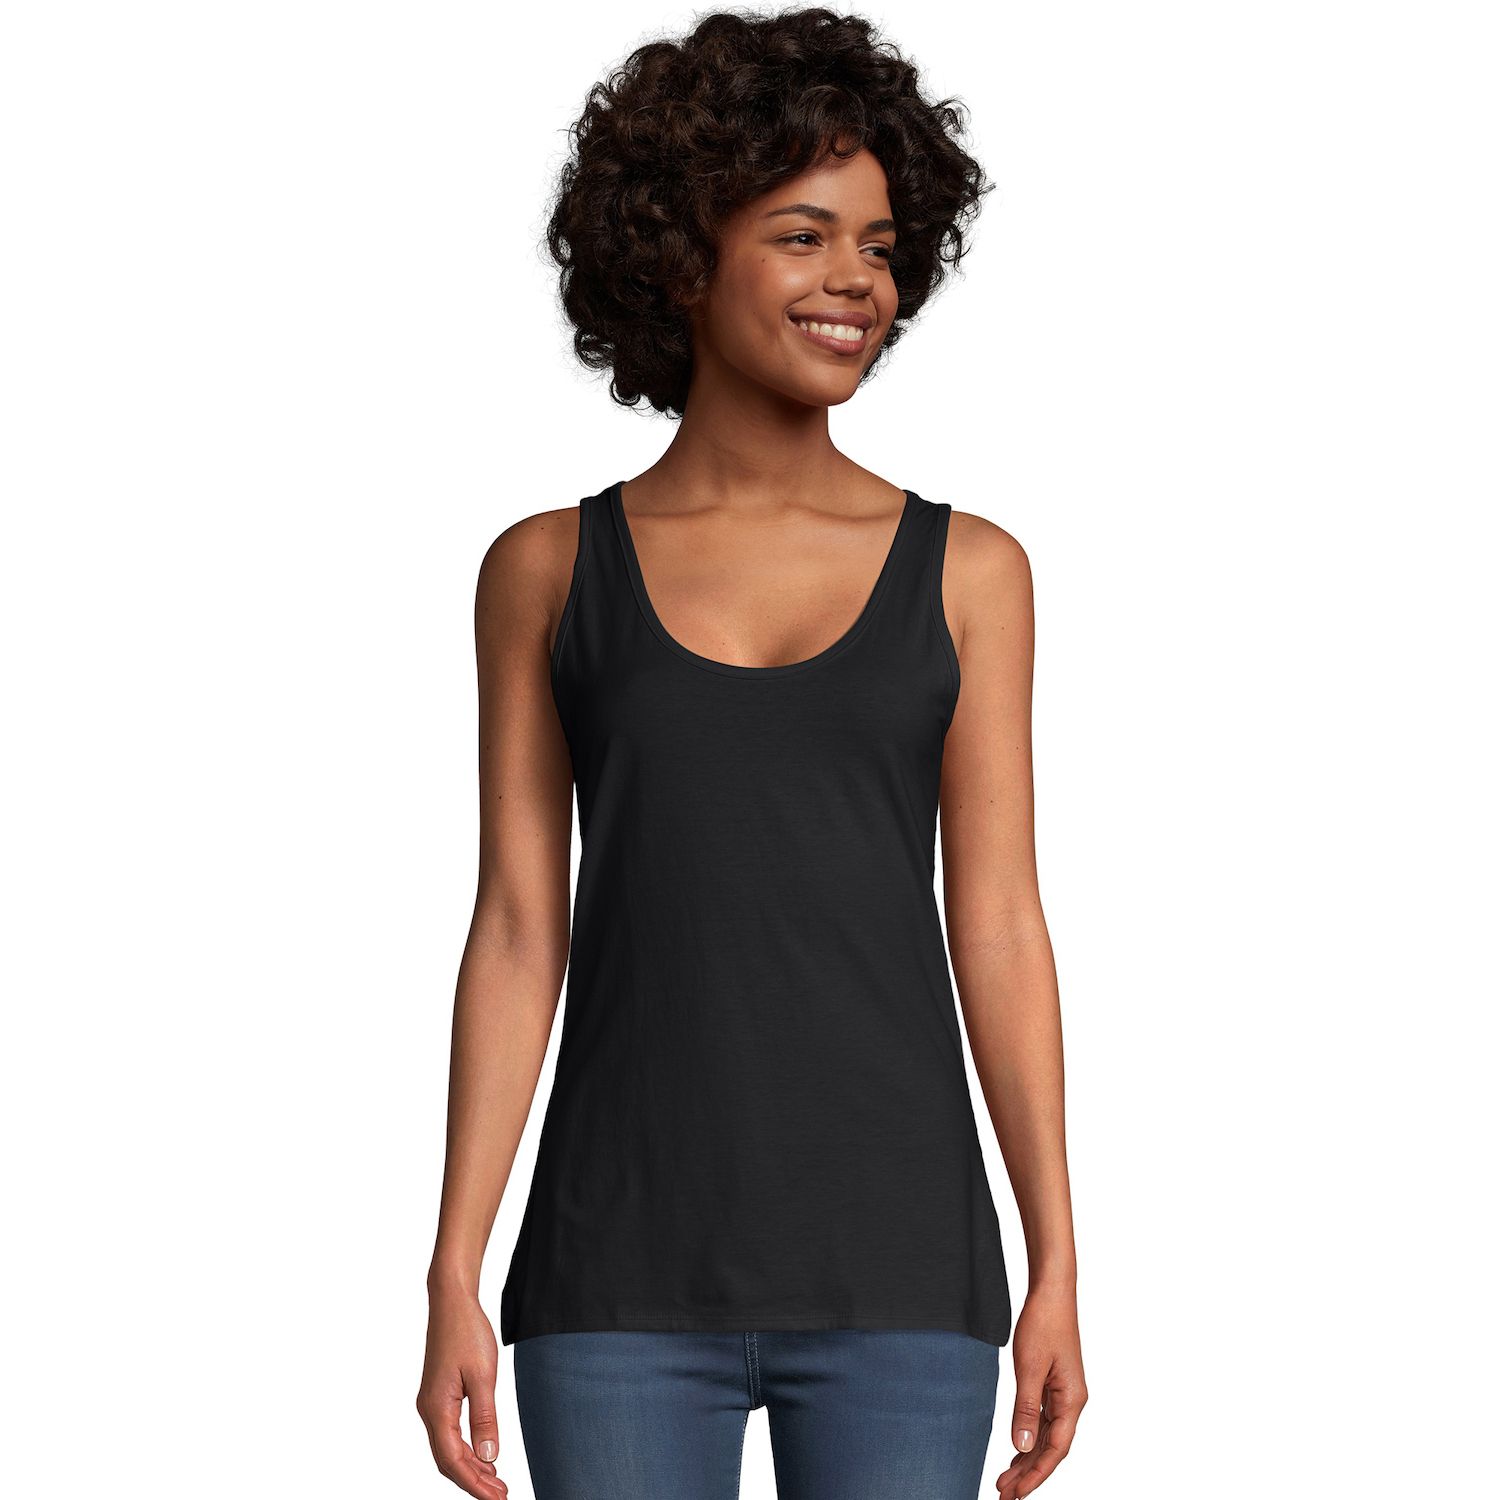 Image for Hanes Women's Basic Essential Tank Top at Kohl's.